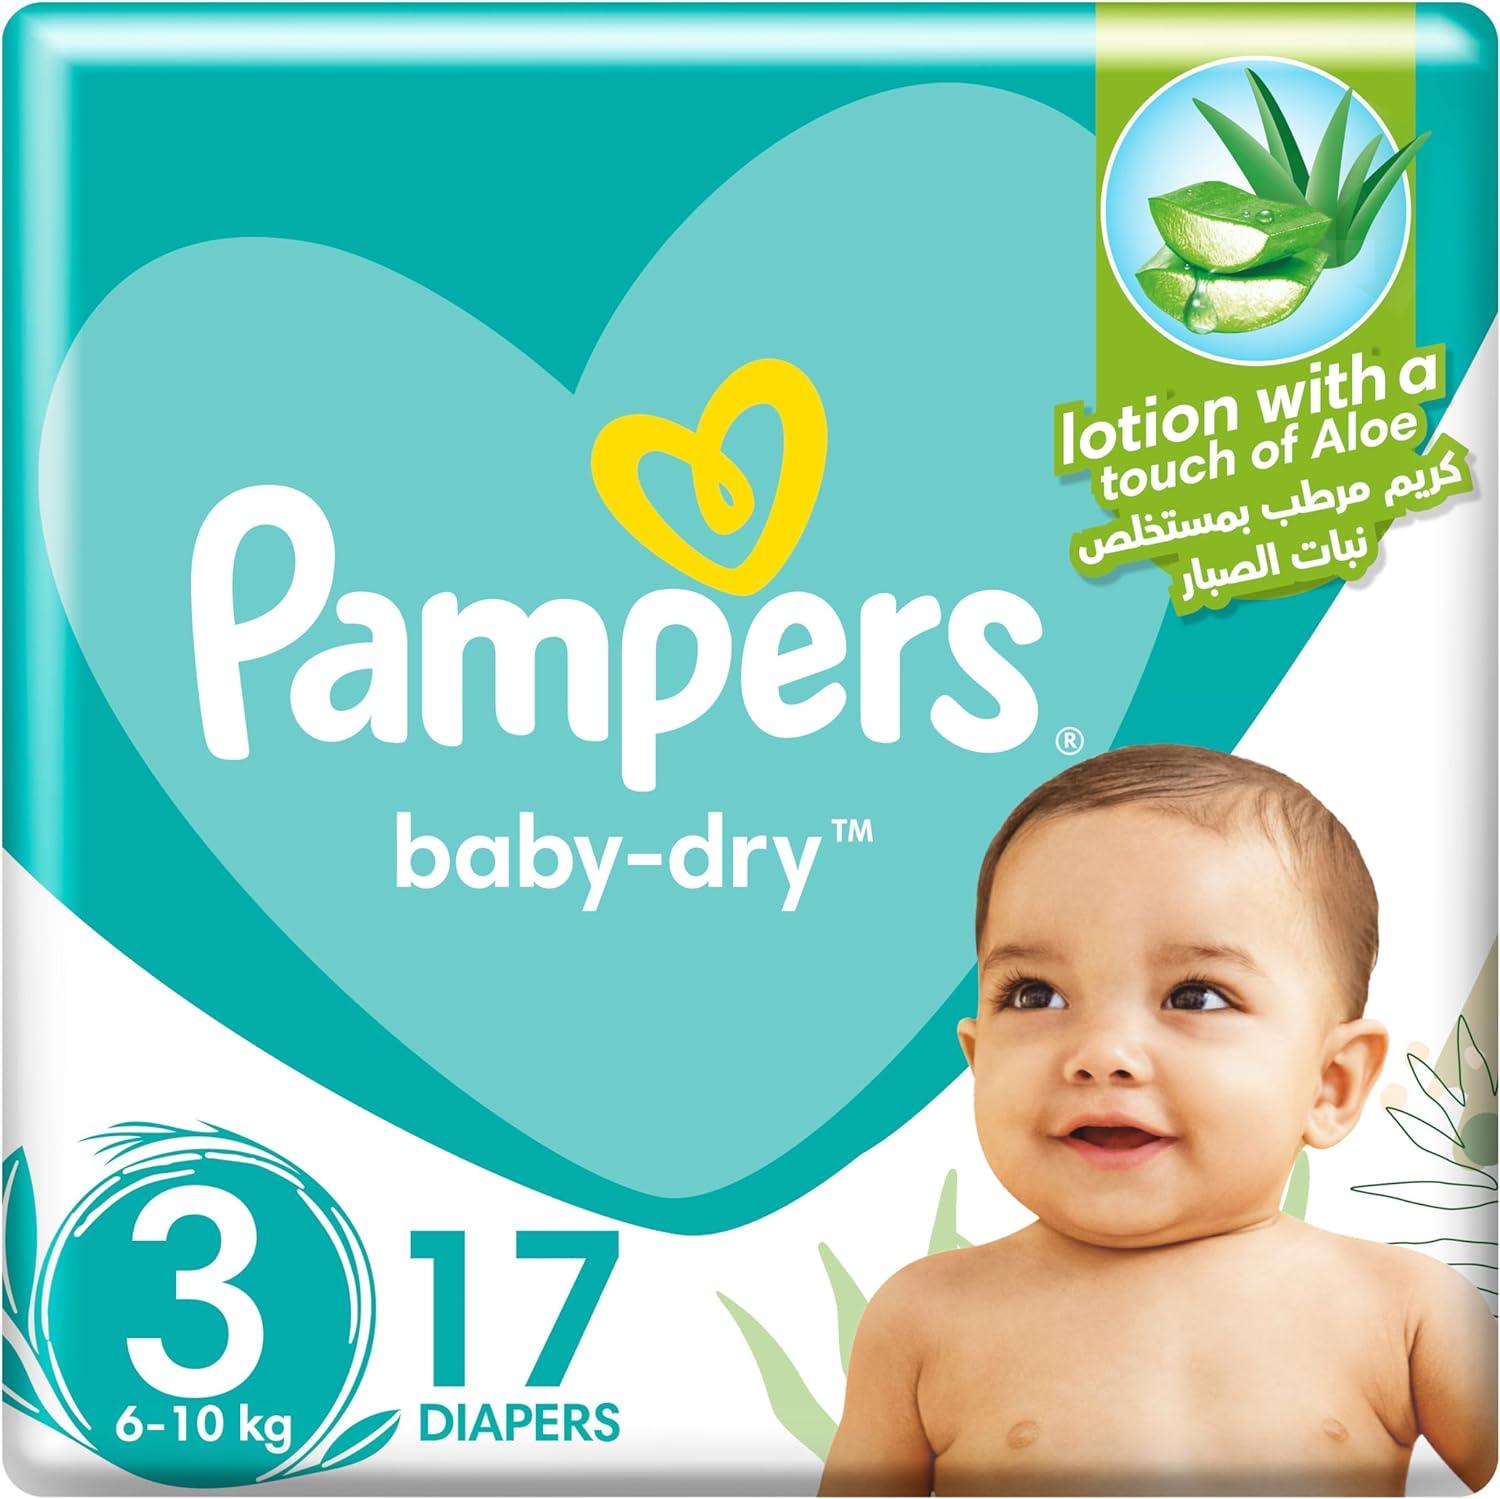 Pampers Baby-Dry Taped Diapers with Aloe Vera Lotion, Protection, Size 3, 6-10kg, 17 Count - Wellness Shoppee